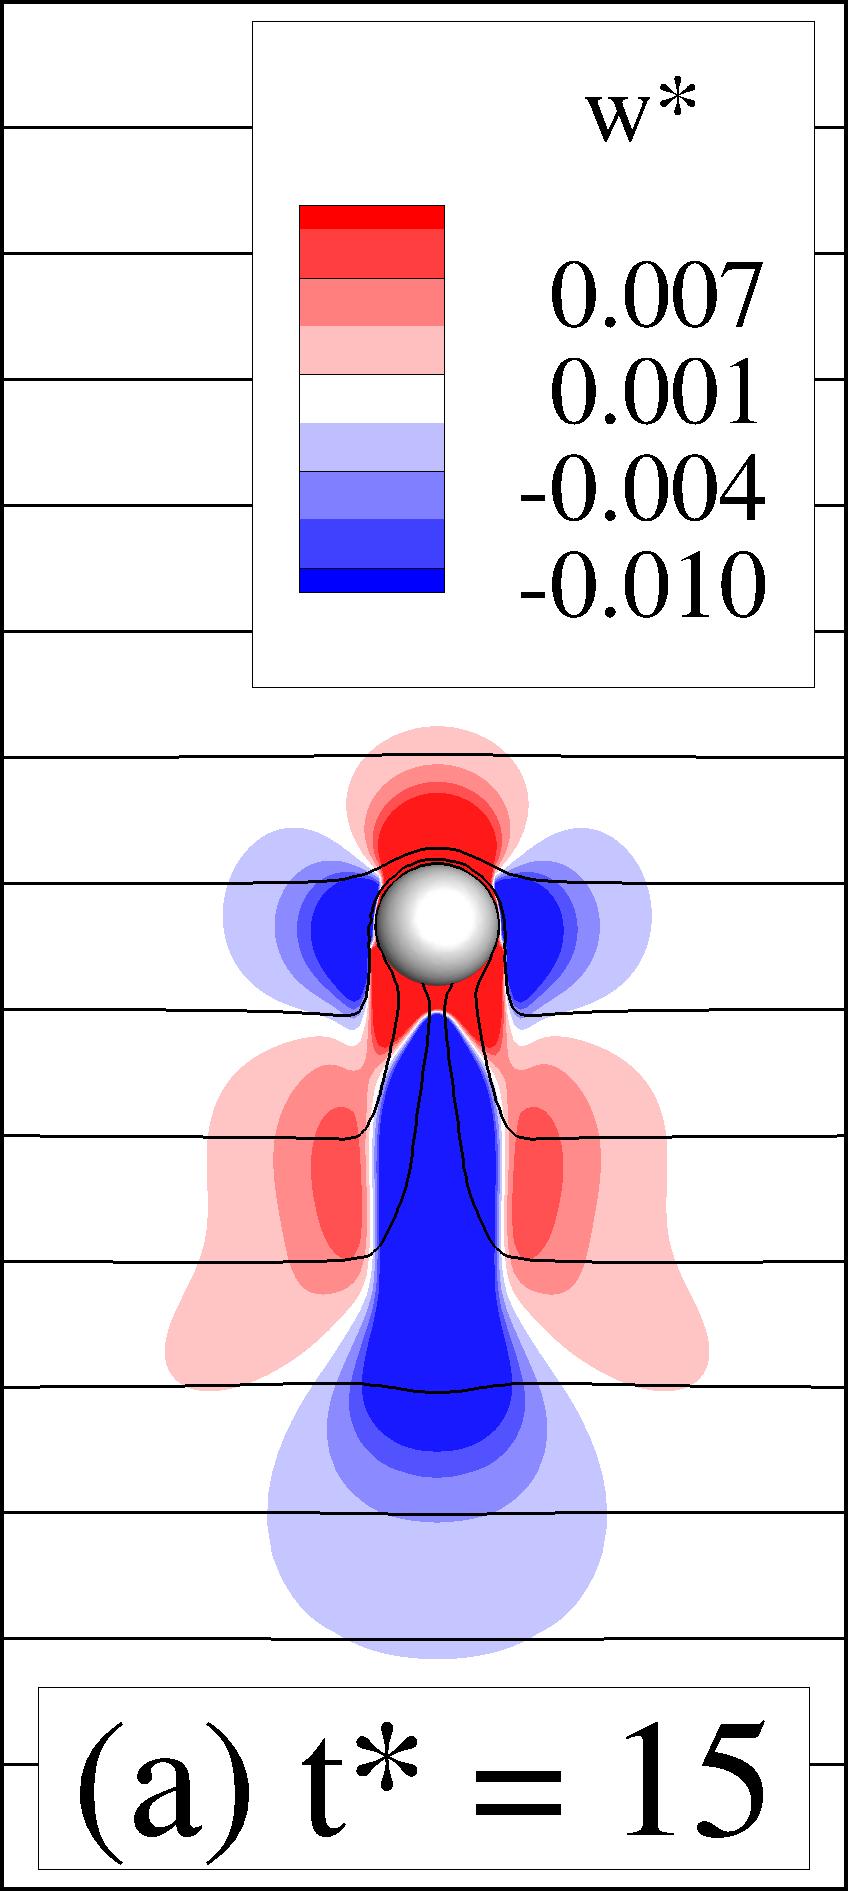 FIGURE 2. ISOPYCNALS AND CONTOURS OF THE VERTICAL COMPONENT OF VELOCITY FOR THE MOTION OF A SINGLE DROP IN A LINEARLY STRATIFIED FLUID AT Fr = 5.